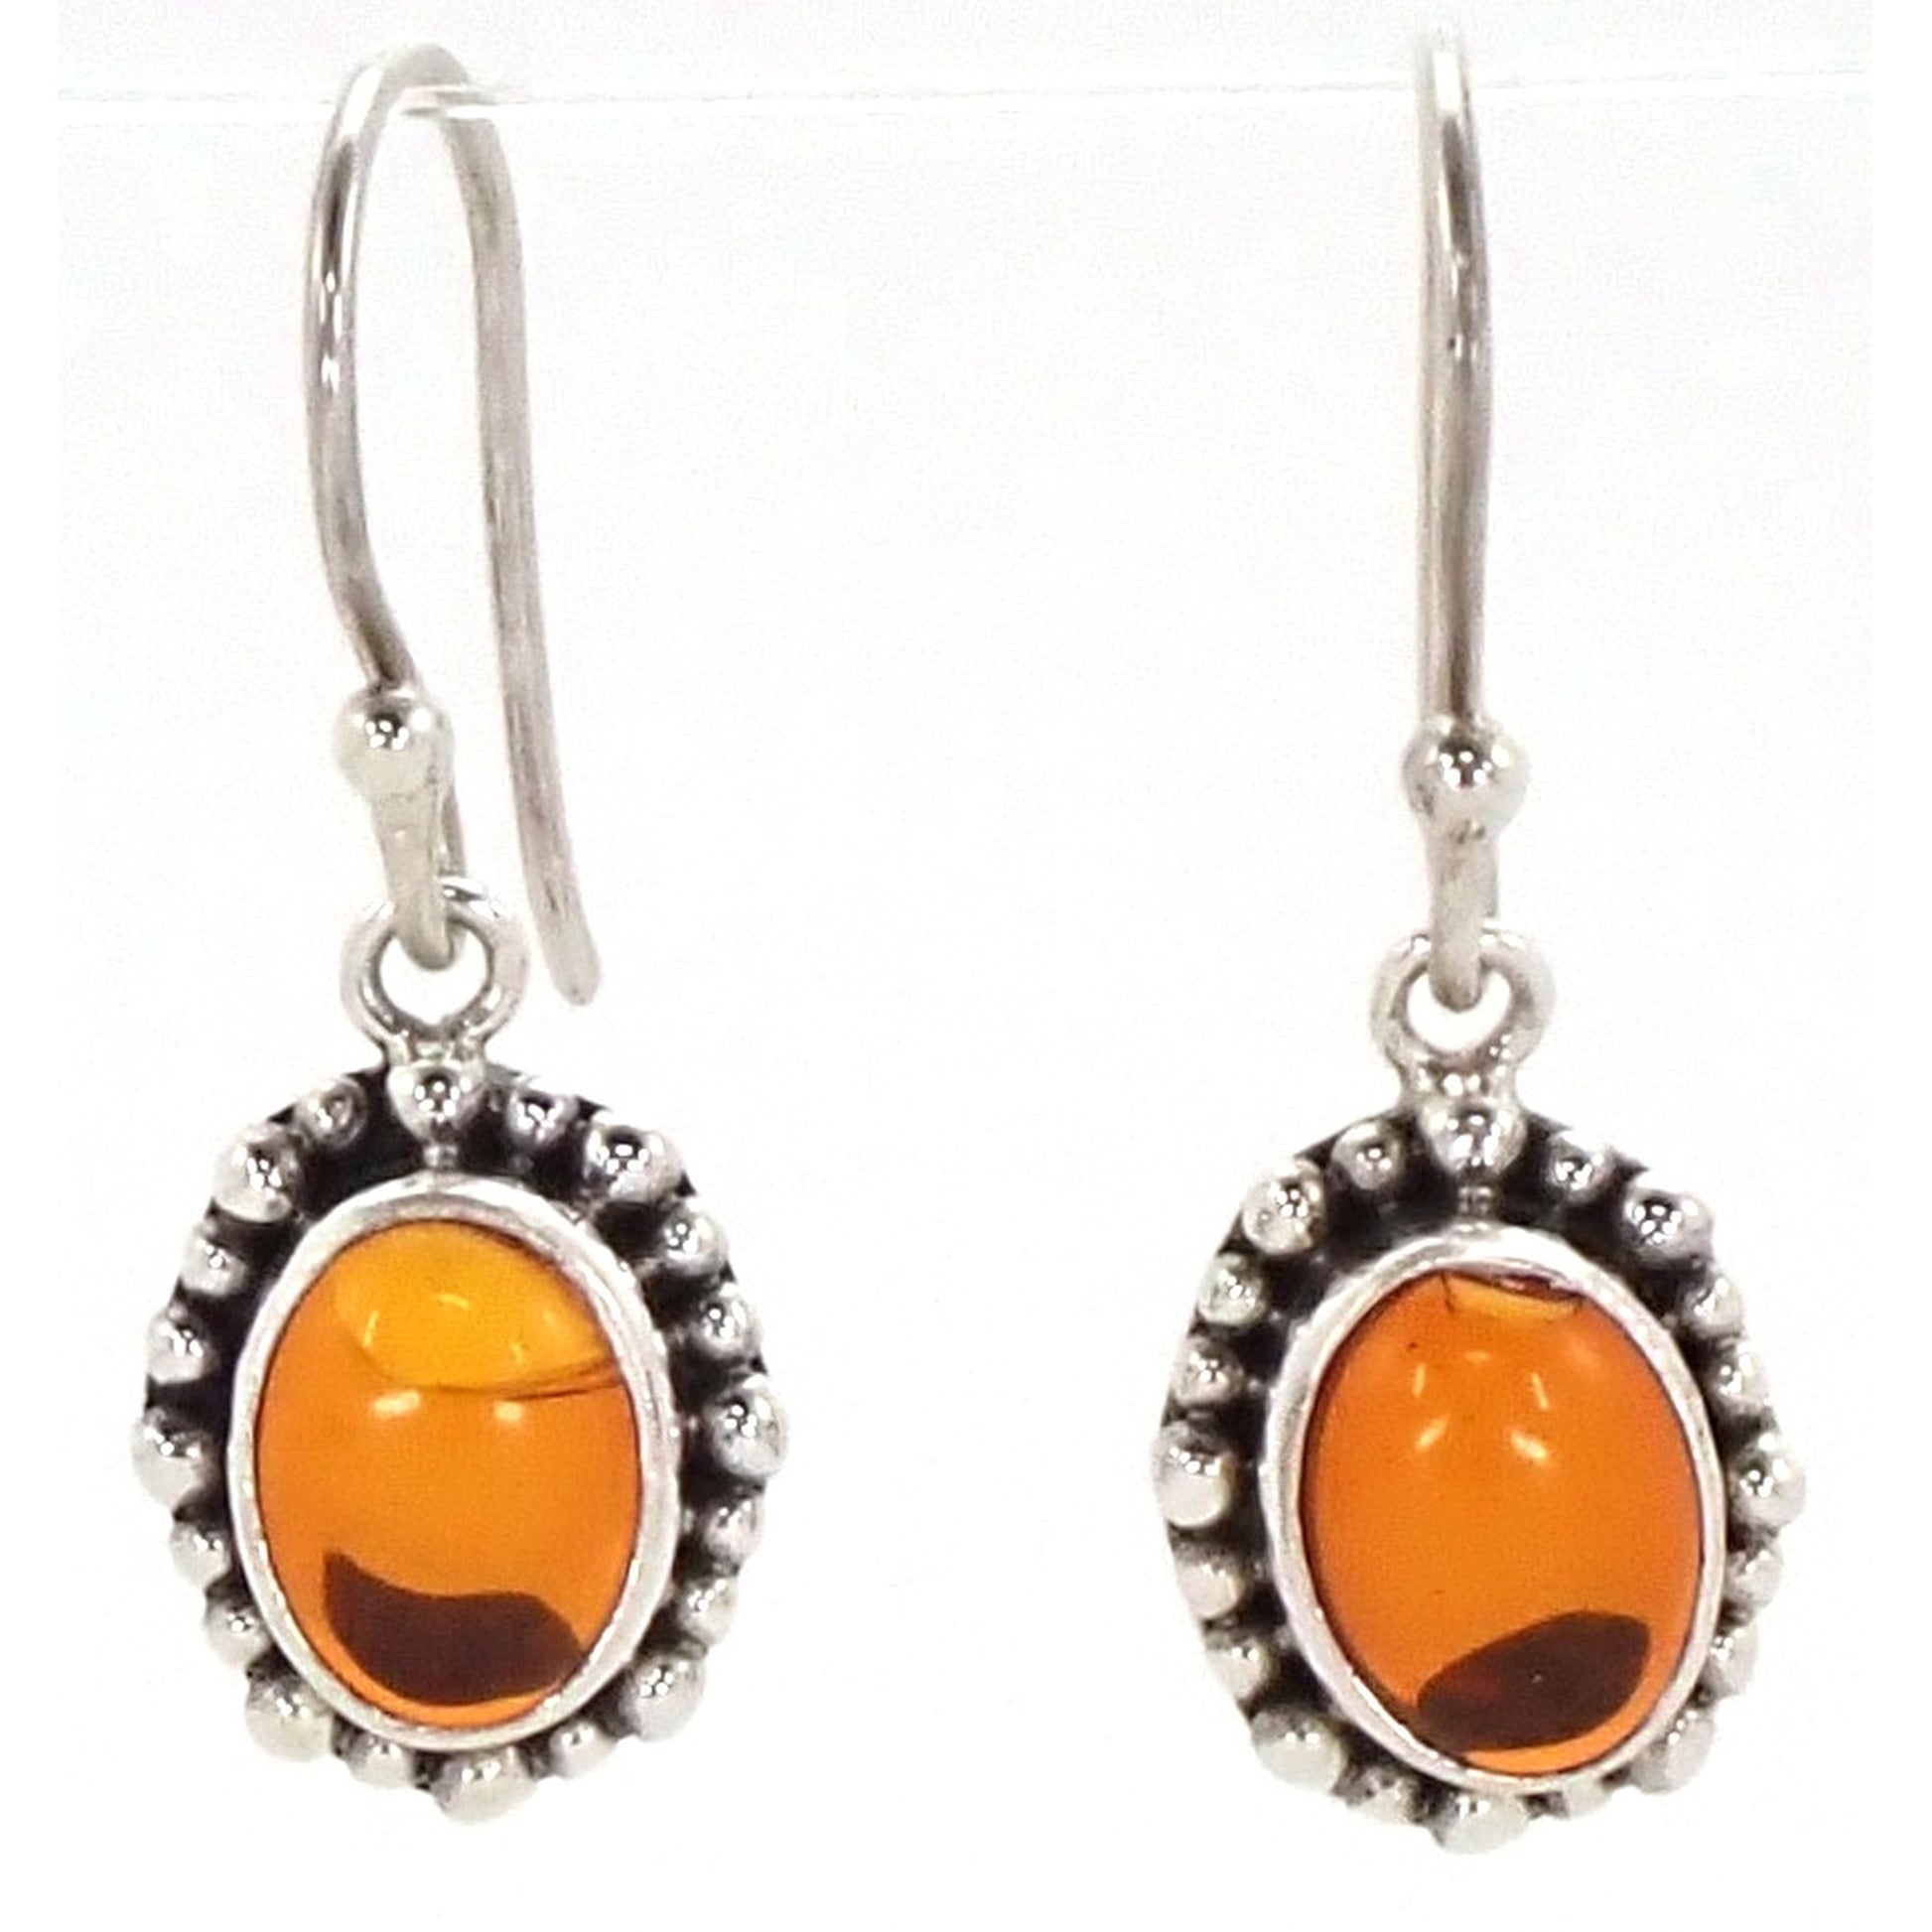 Silver earrings with oval amber gemstones.